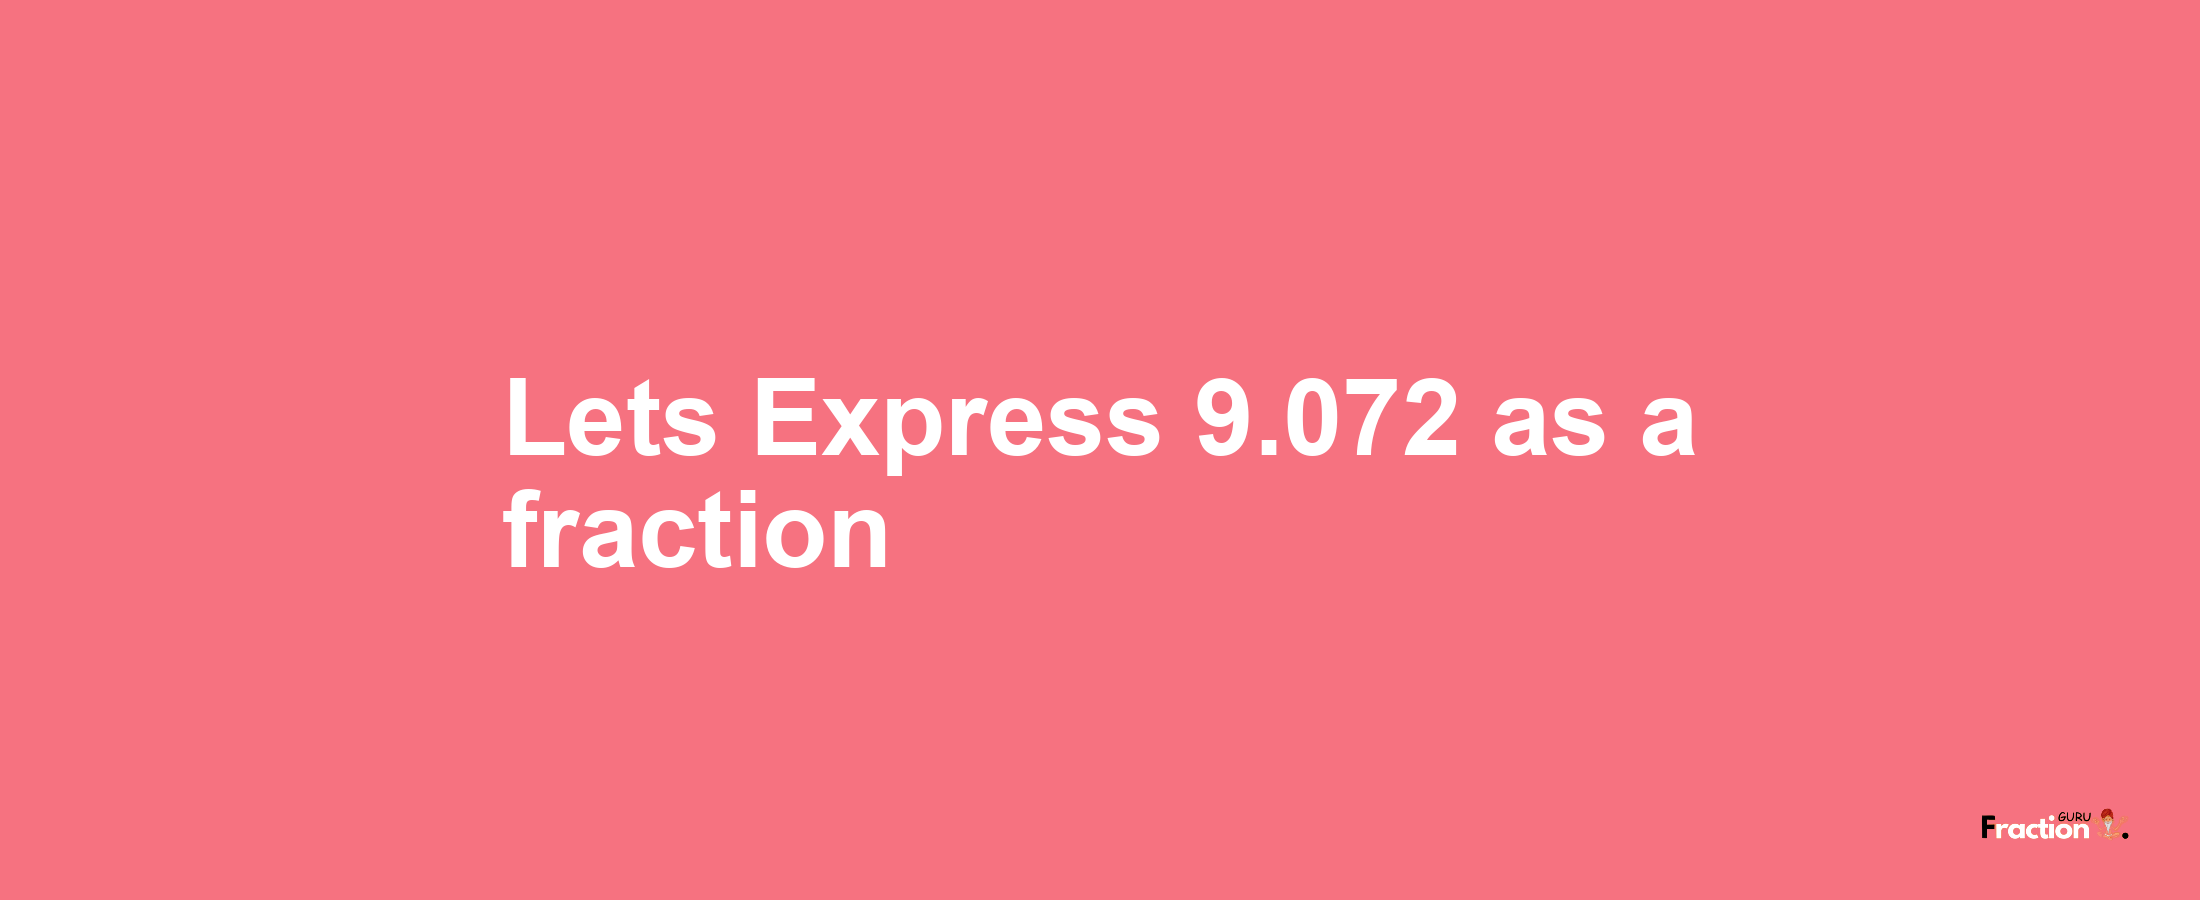 Lets Express 9.072 as afraction